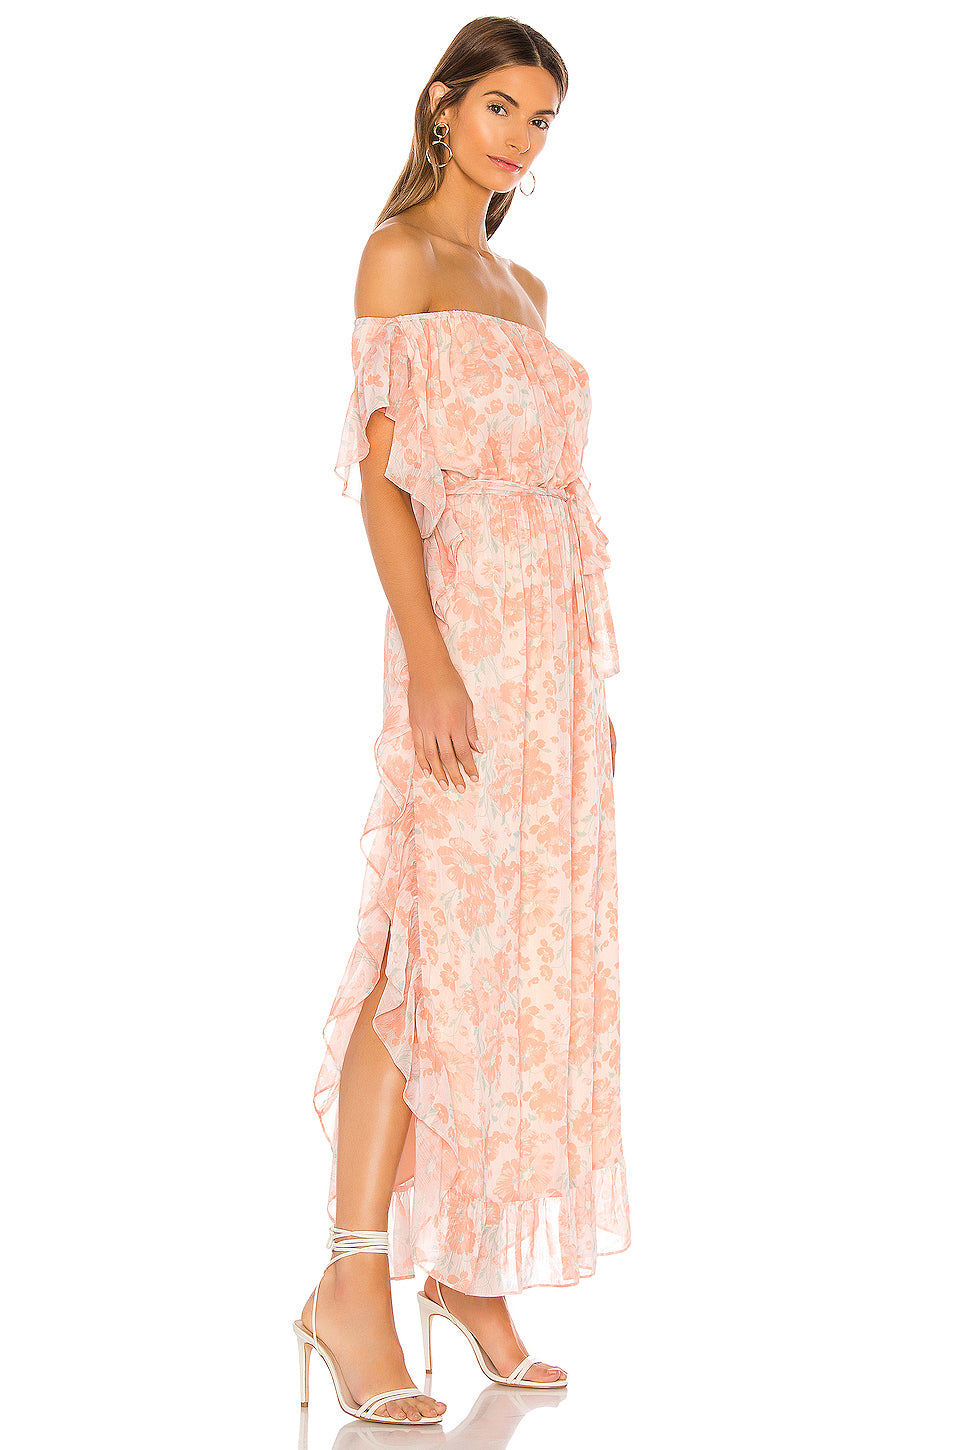 Blaire Dress in BLUSH POPPY FLORAL